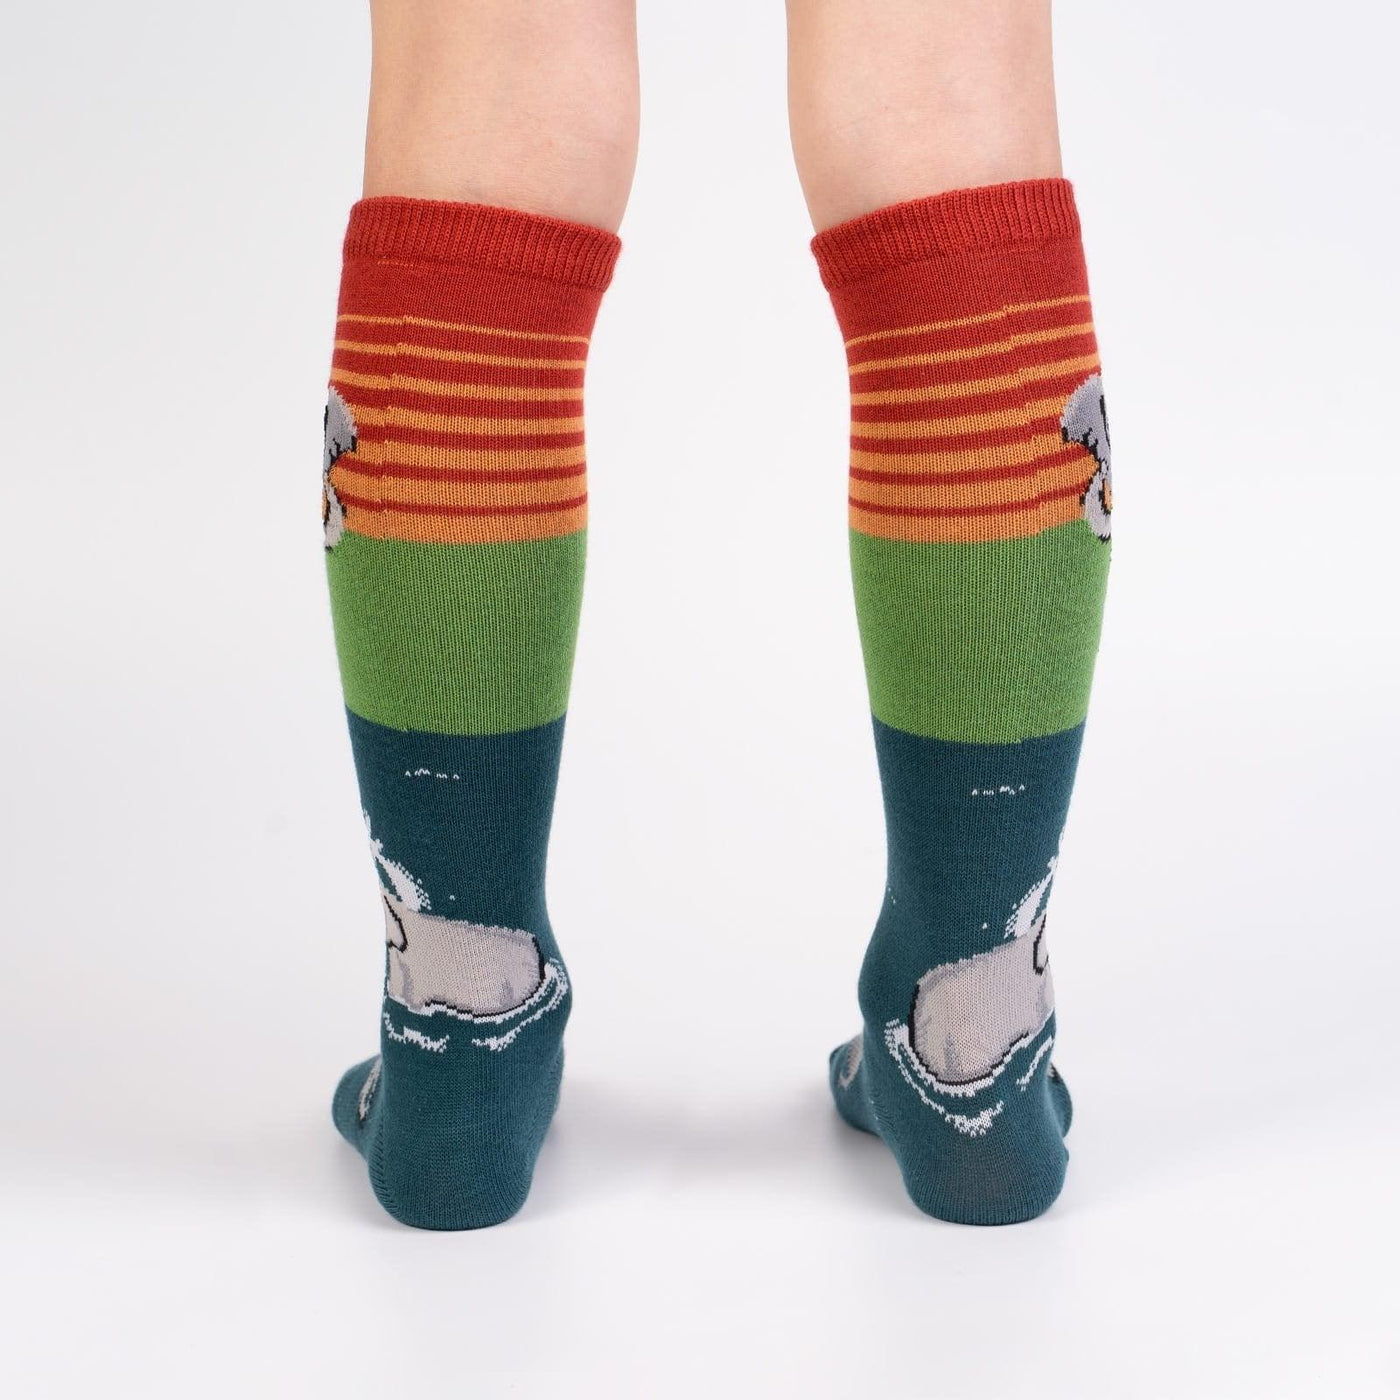 Make A Splash, Youth Knee-high - Sock It To Me - The Sock Monster